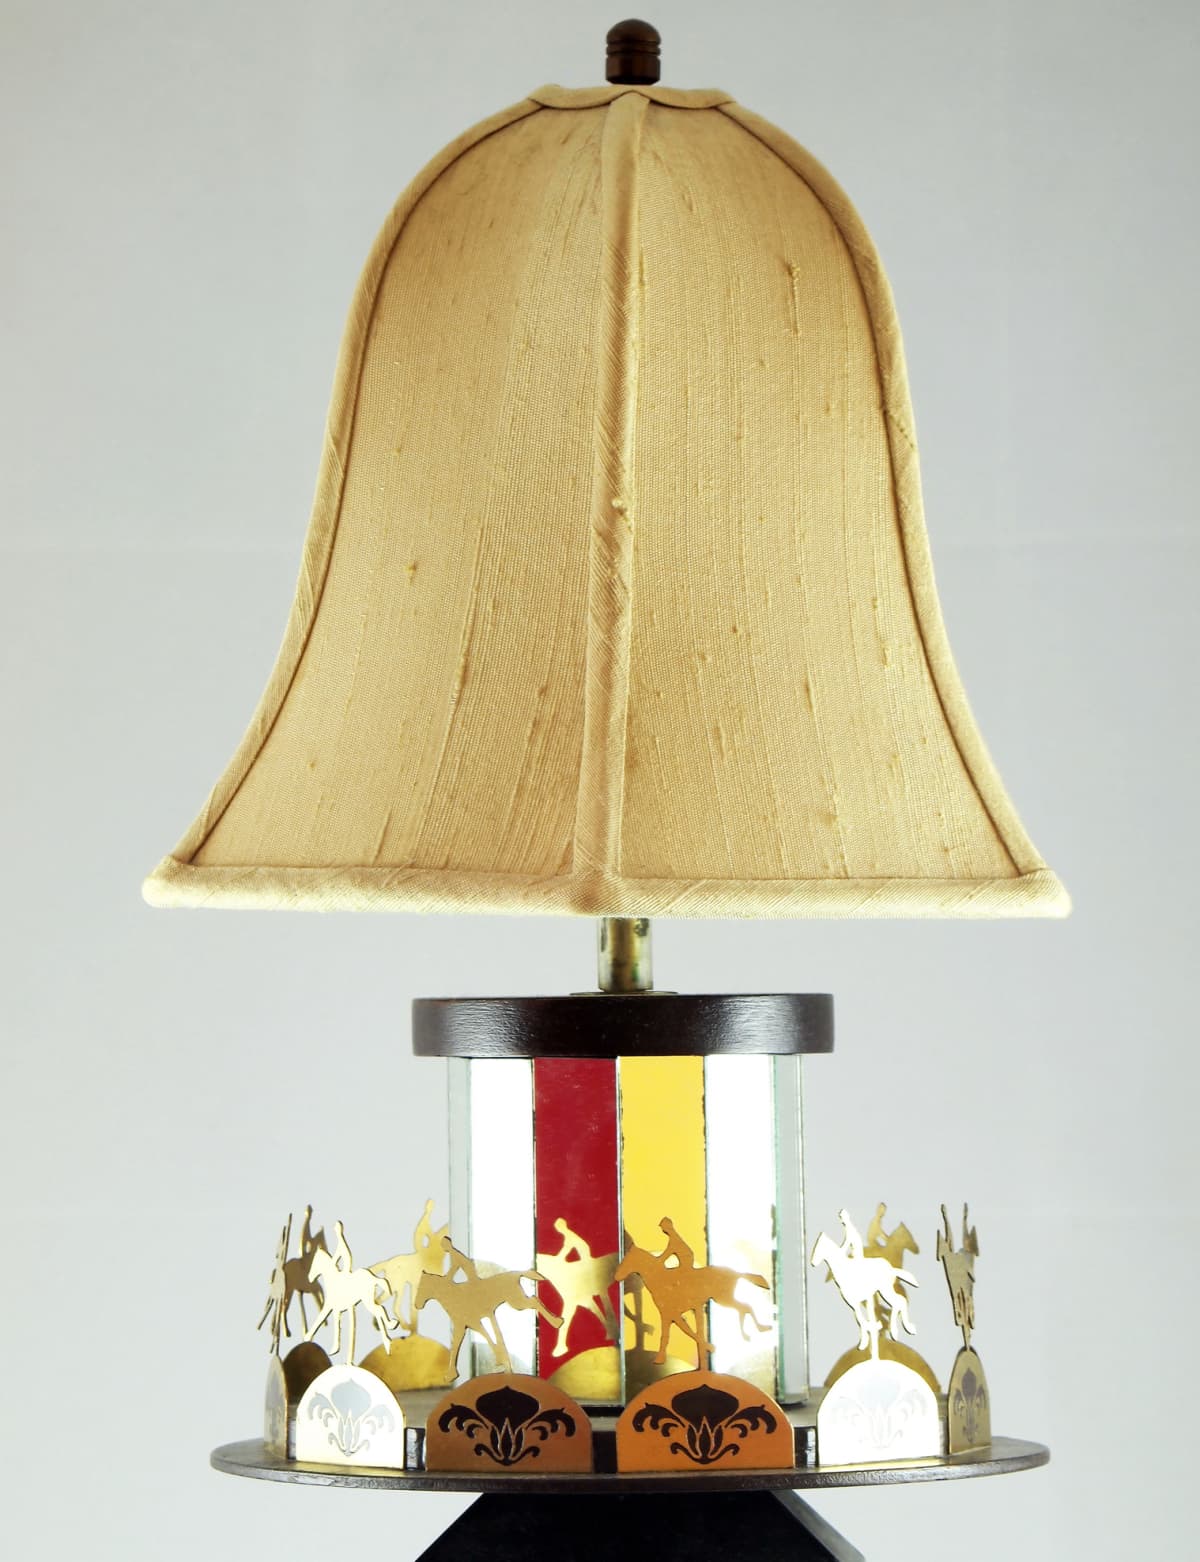 A lamp with a large shade on a table